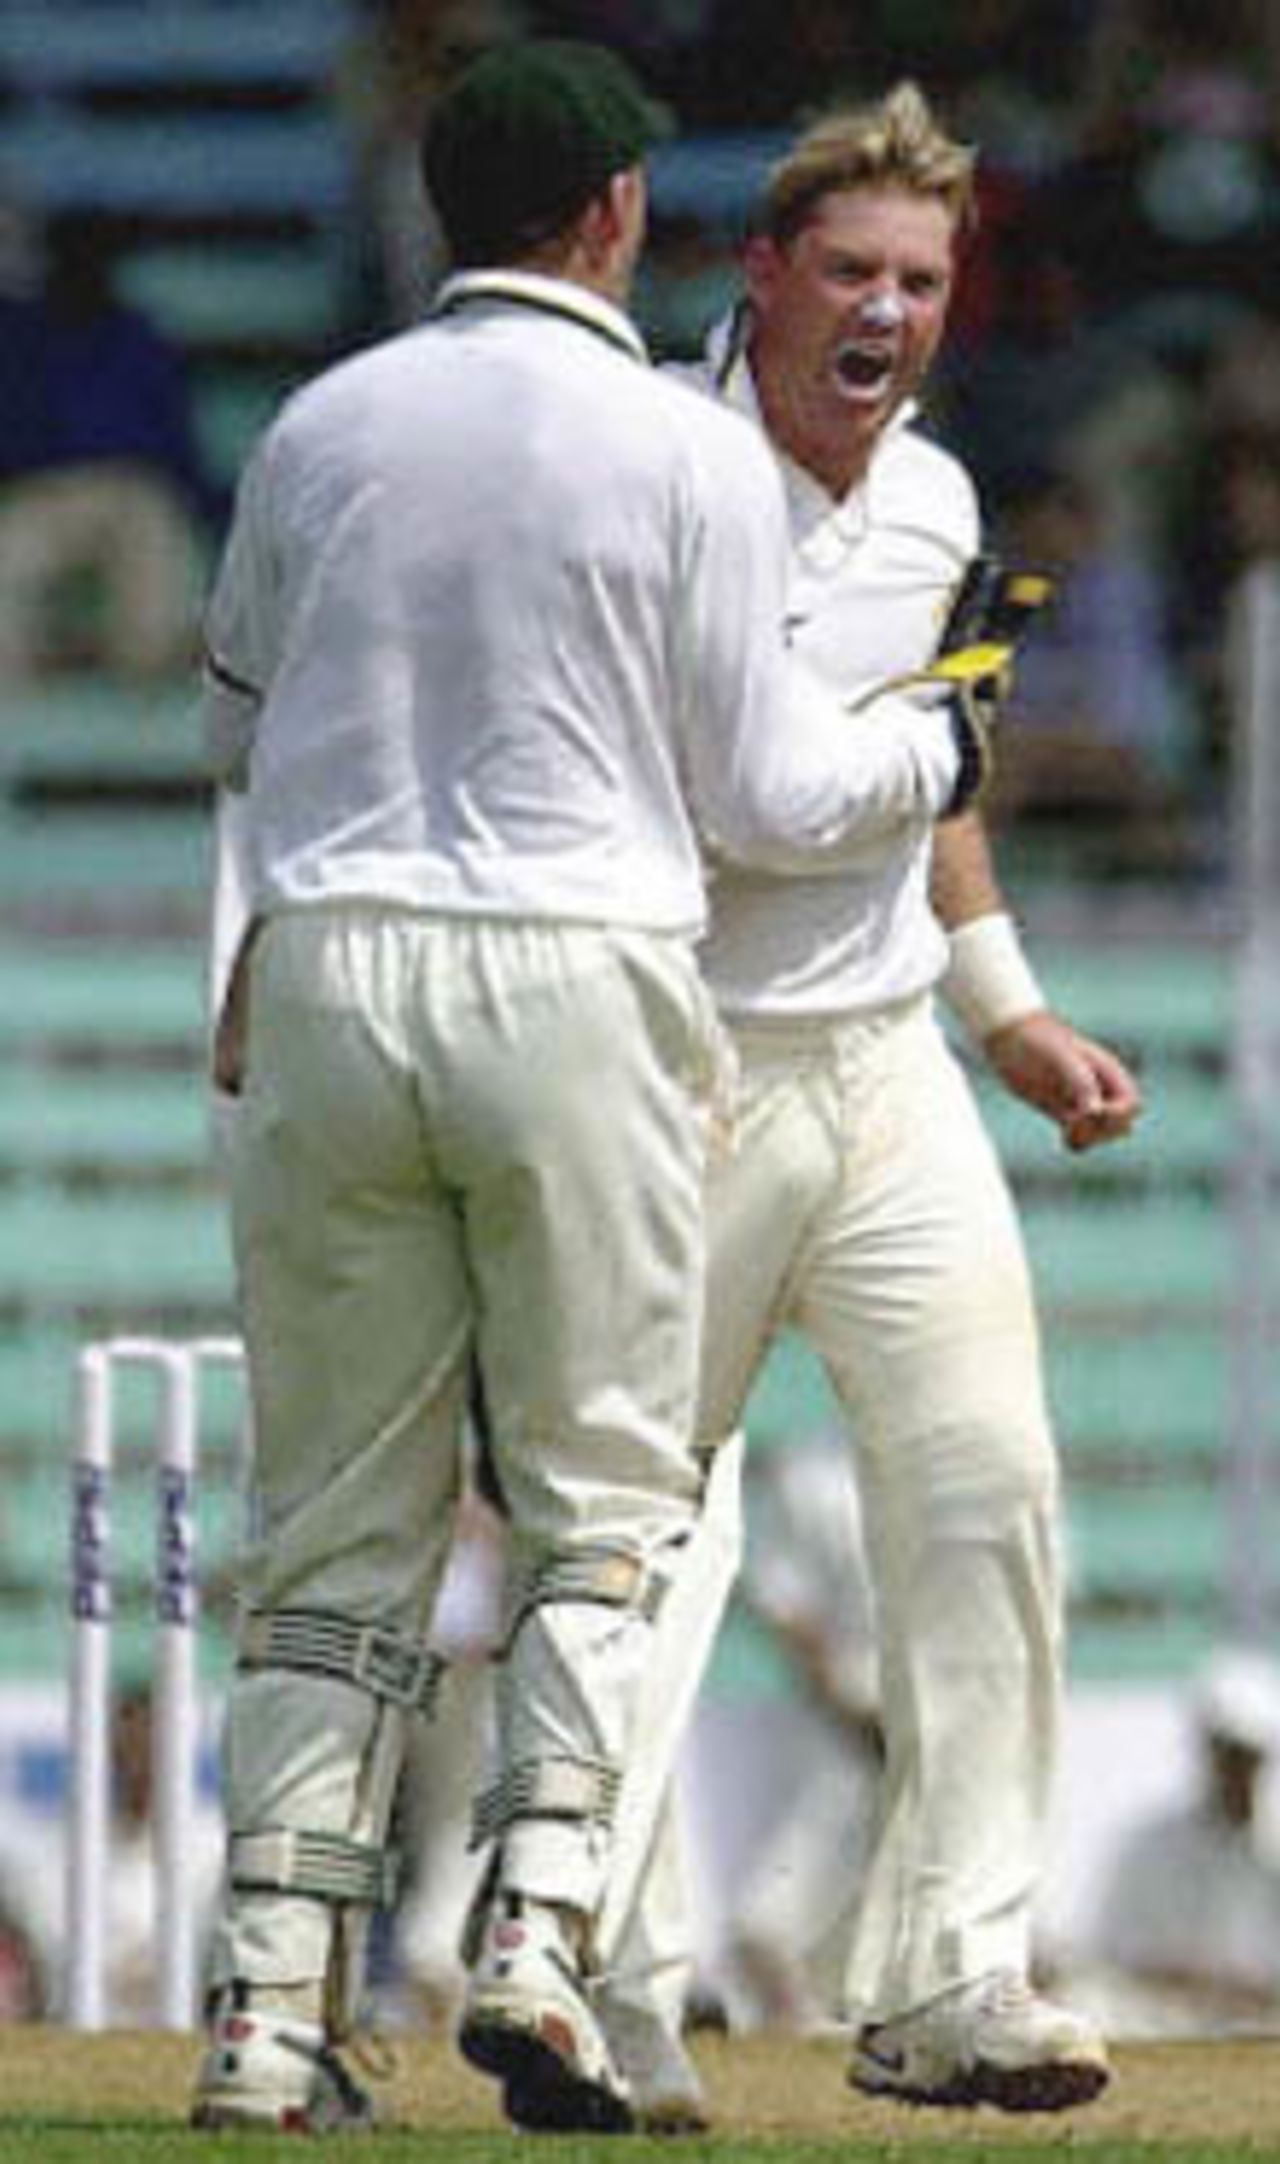 Australia's ace leg spinner Shane Warne (R) shouts after taking Indian captain Sourav Ganguly's wicket as he is cogratulated by Australian wicket keeper Adam Gilchrist on the first day of the first test match between India and Australia in Wankhade stadium in Bombay 27 February 2001. Warne took three wickets as India struggled at 165 for 8 wickets after tea.